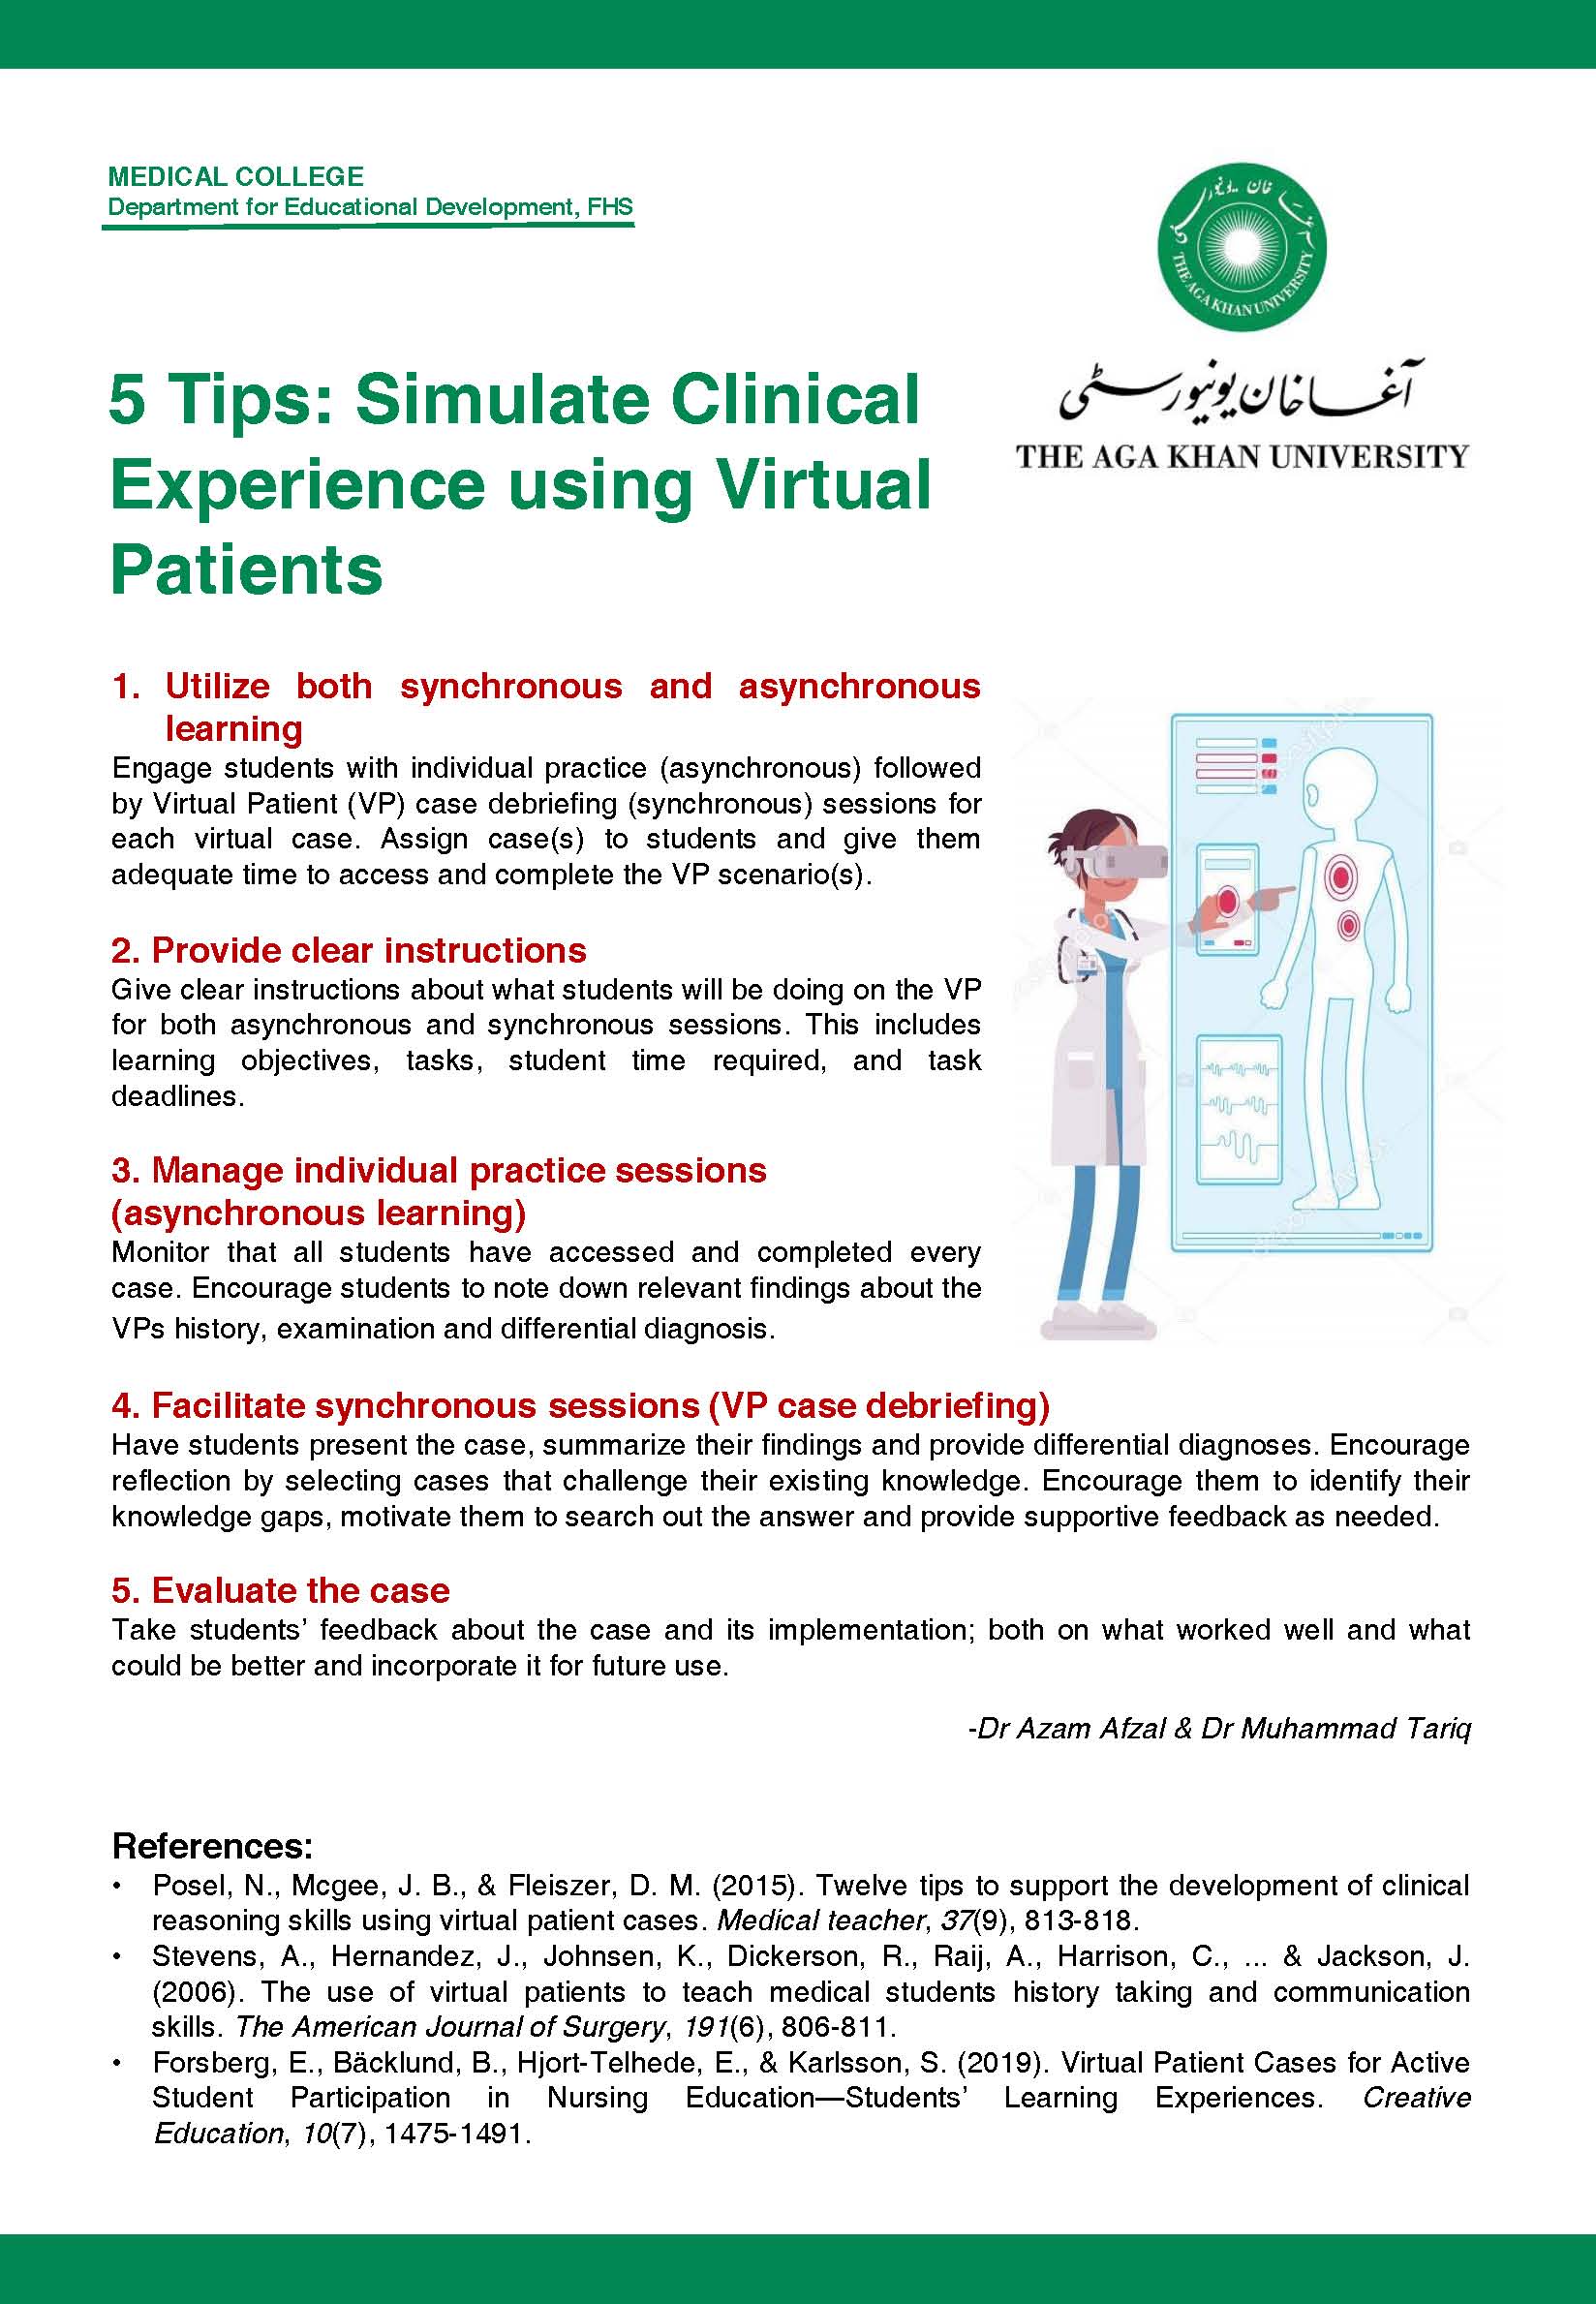 Simulate clinical experience using virtual patients.jpg